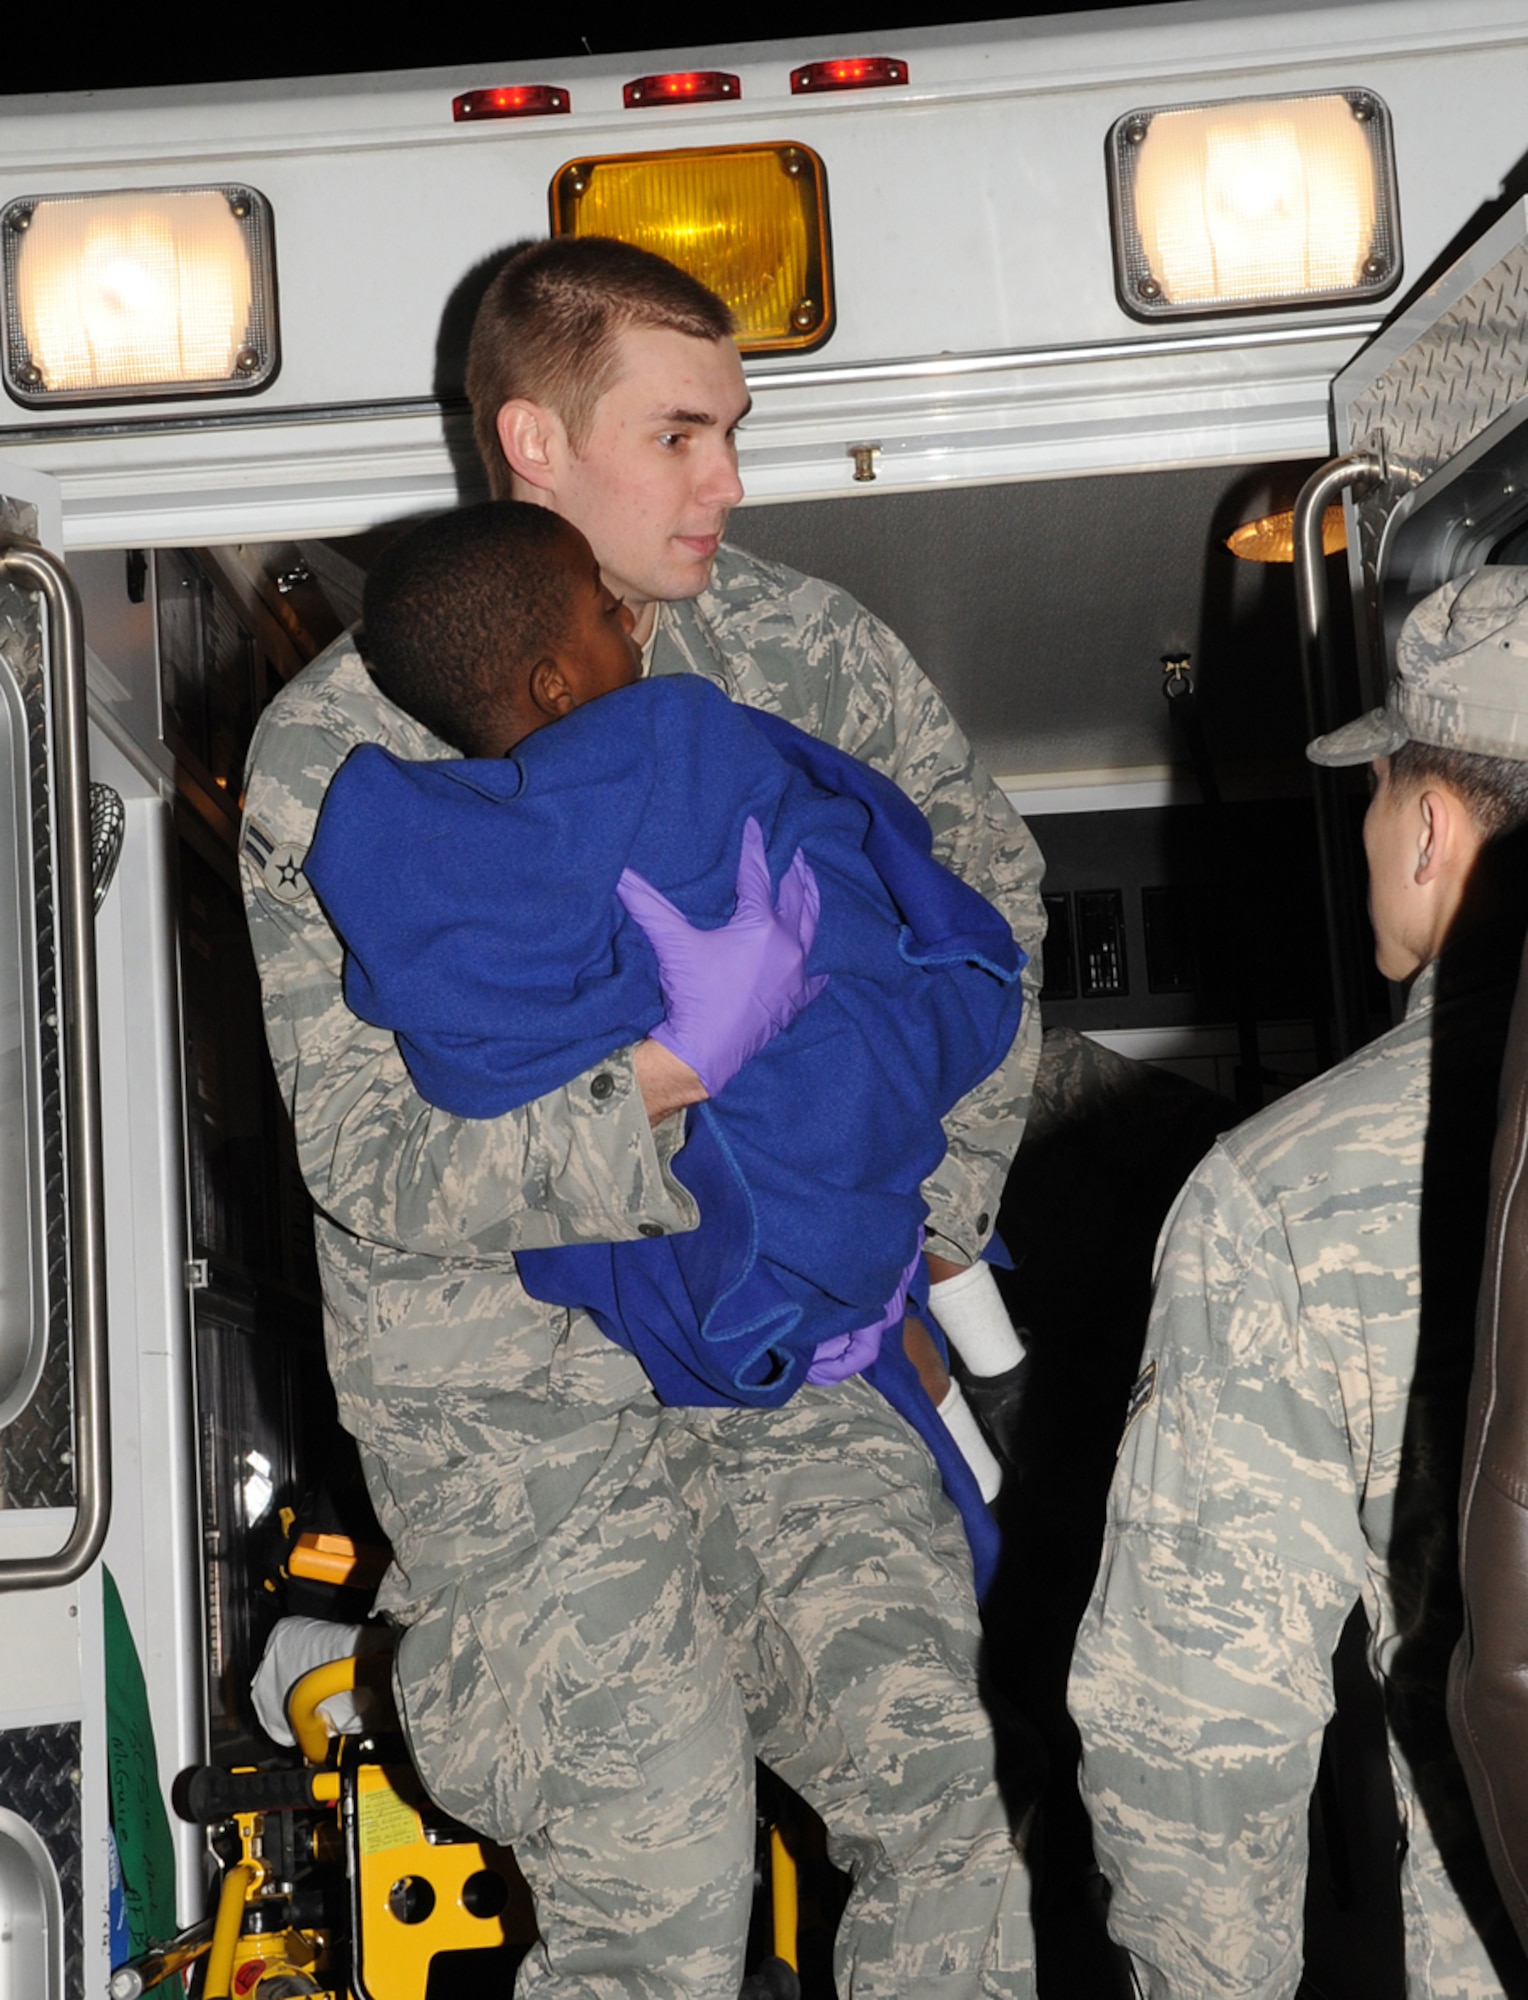 JOINT BASE MCGUIRE-DIX-LAKEHURST, N.J. – Airman 1st Class Brian Long, 87th Medical Group, carries a Haitian child off an ambulance at the passenger terminal here Saturday shortly after 44 survivors arrived from Port-au-Prince, Haiti. Airmen provided basic medical care to evacuees as needed and transported those with more serious injuries to a local hospital. (U.S. Air Force photo/Staff Sgt. Danielle Johnson)